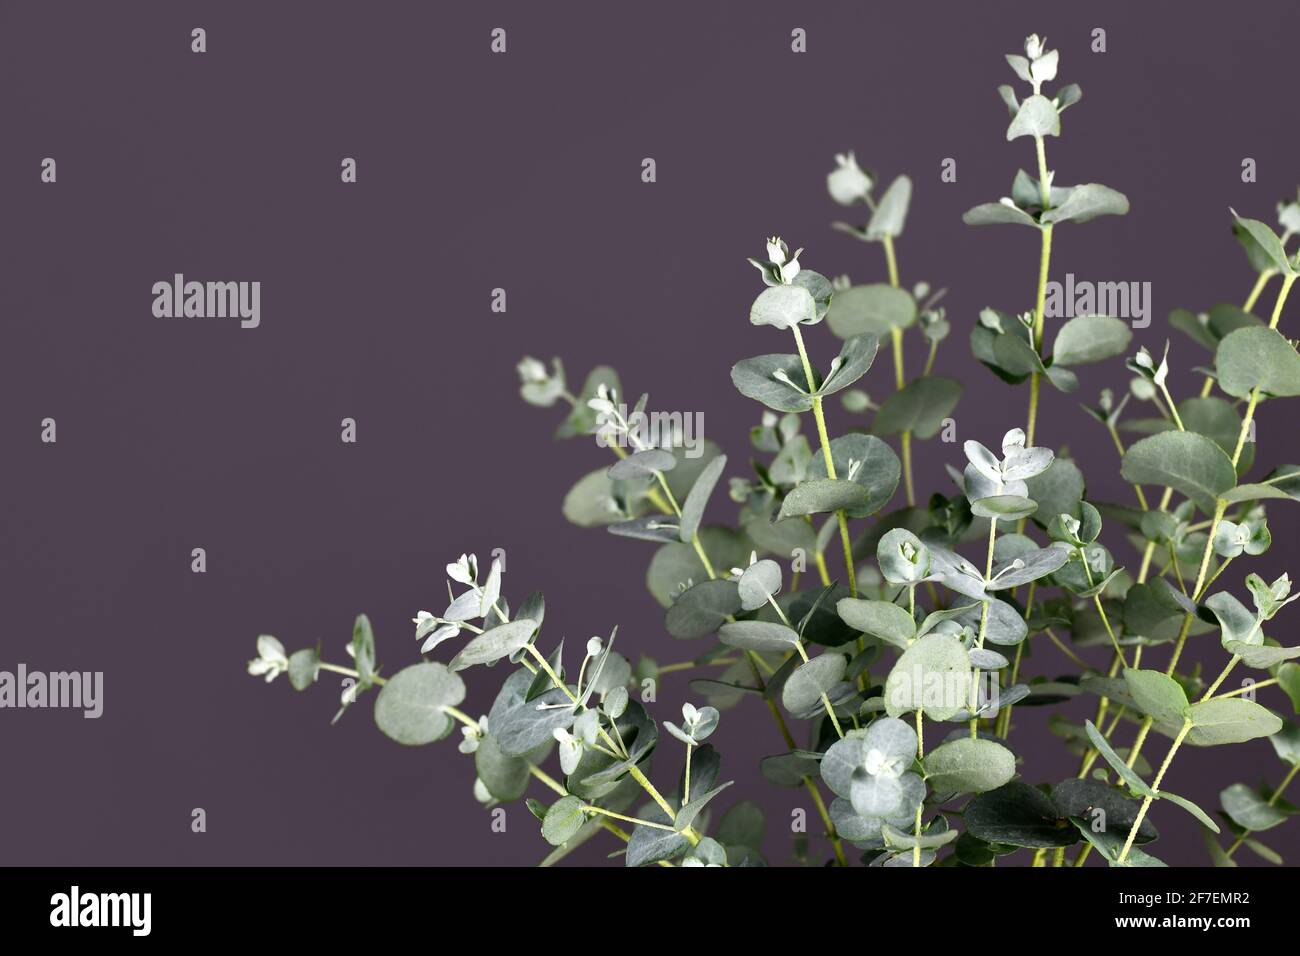 Close up of Eucalyptus plant branches in front of dark gray background Stock Photo